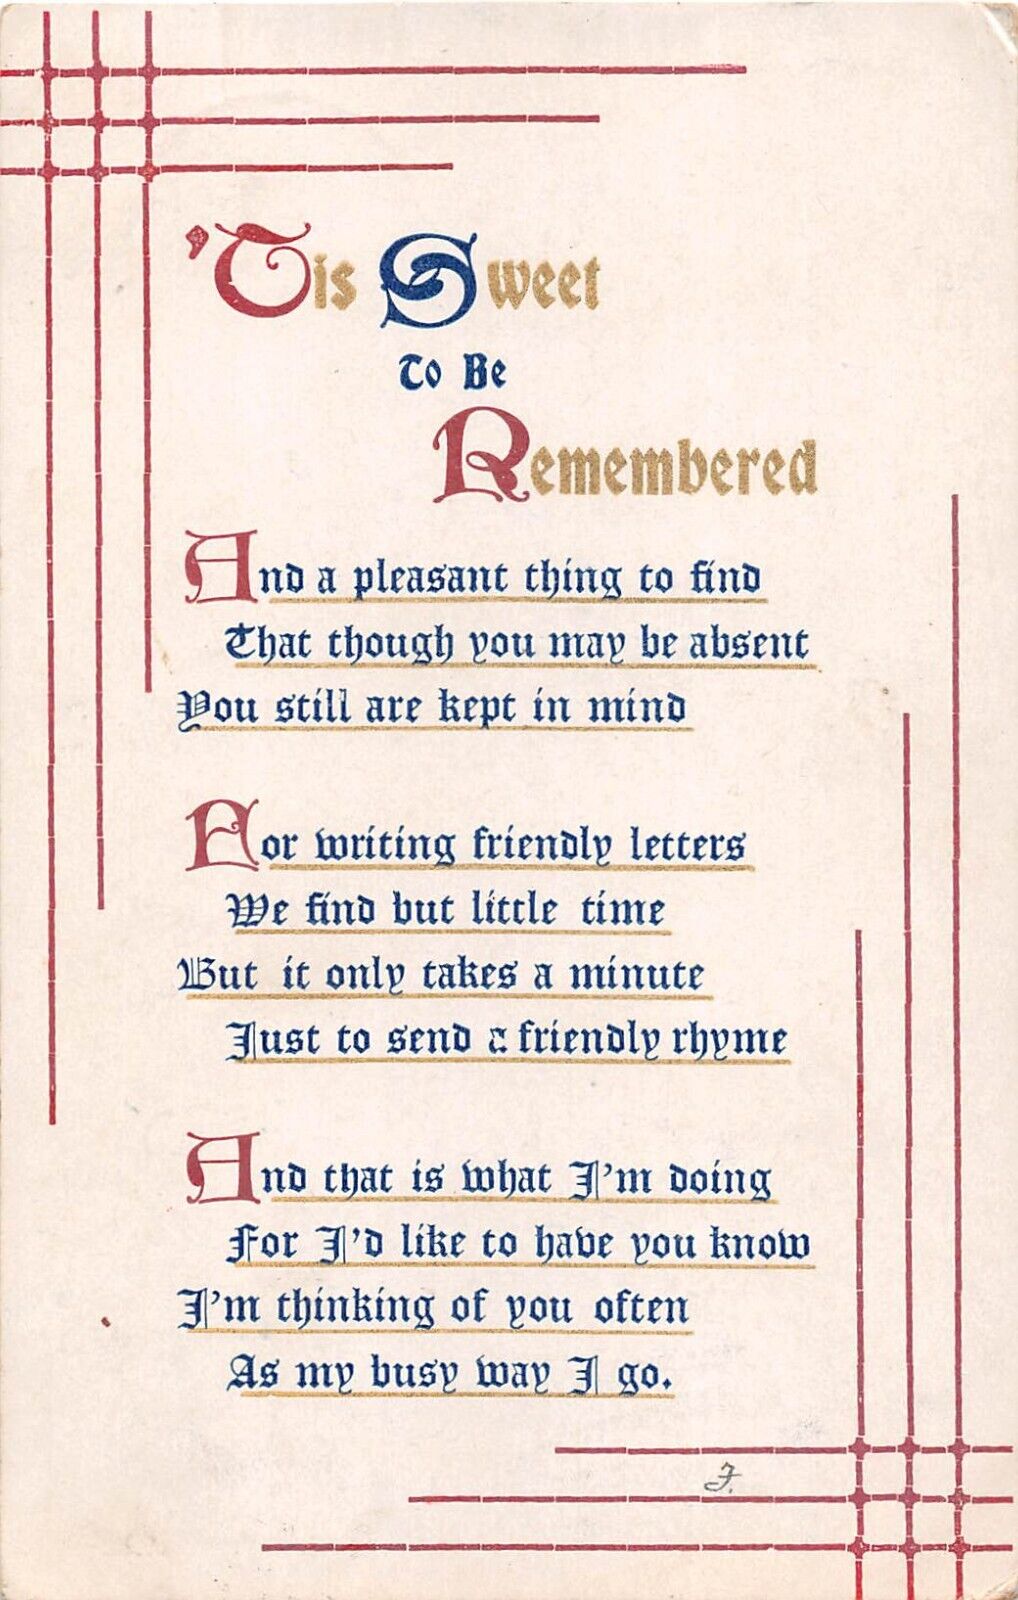 1910 Motto Postcard Titled \'Tis Sweet To Be Remembered - Sandford Card Co.